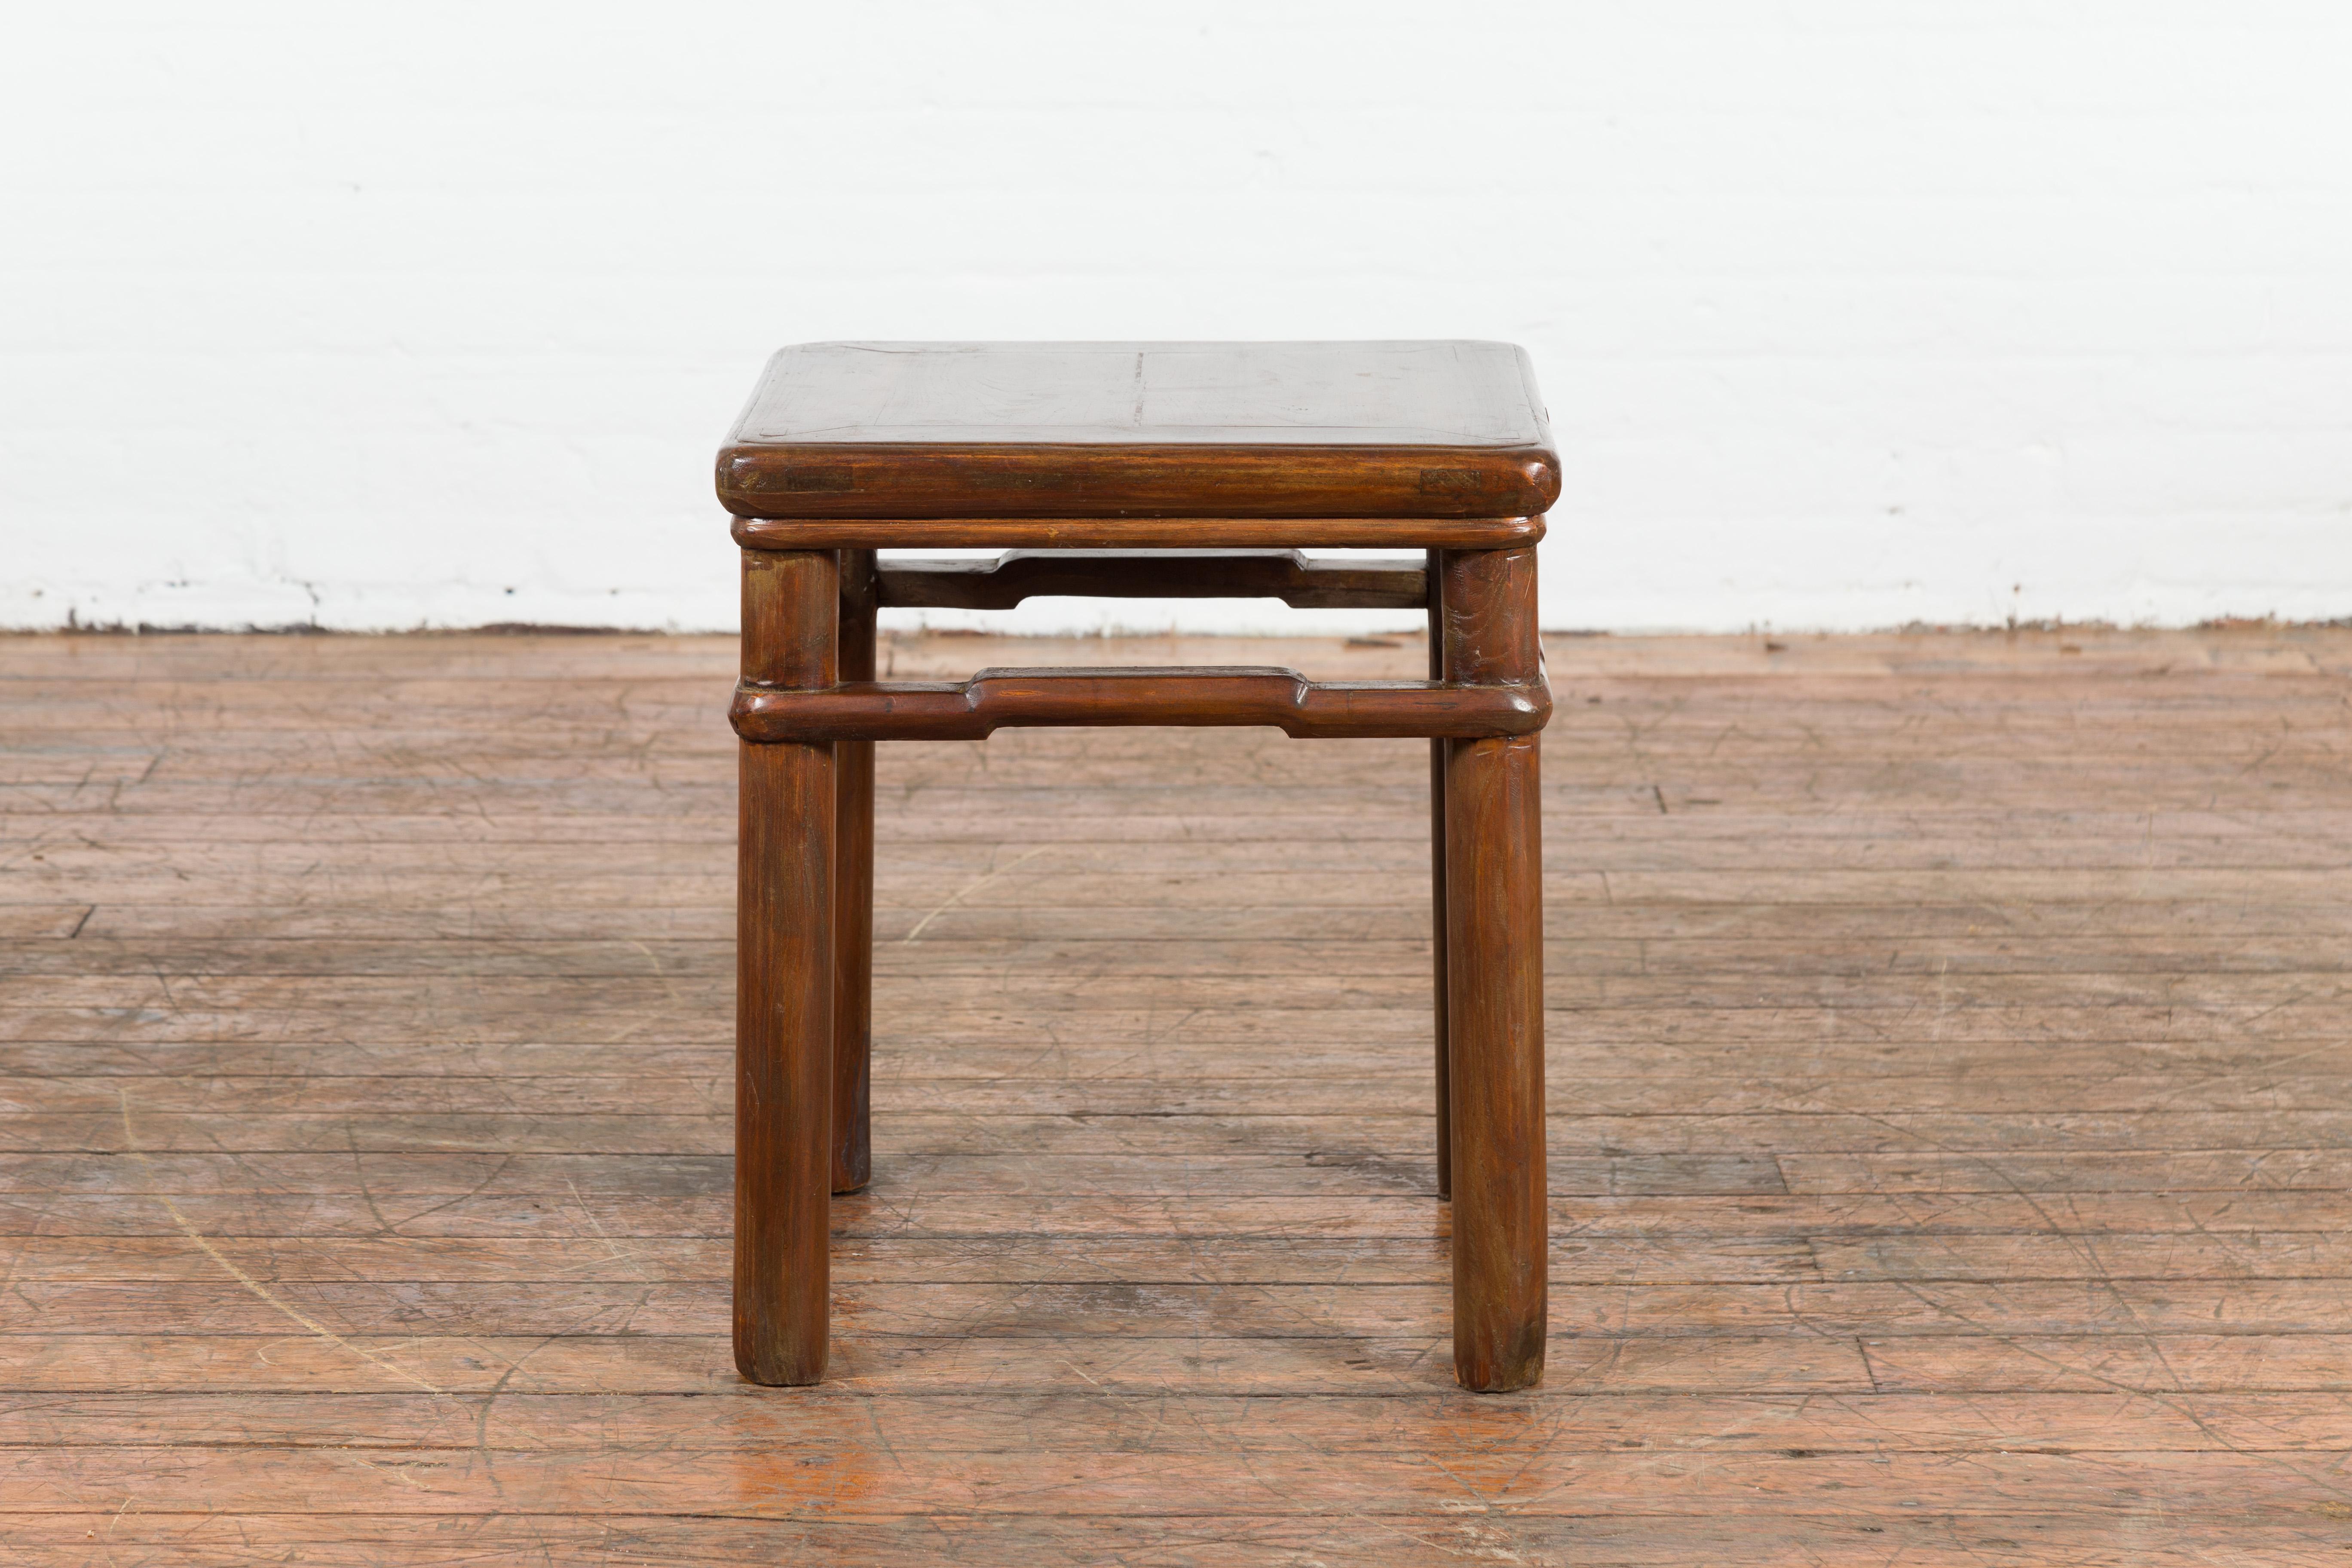 A Chinese Qing Dynasty period antique side table from the 19th century, with humpback stretchers. Created in China during the Qing Dynasty, this side table features a square top with central board, raised on four cylindrical legs connected to one